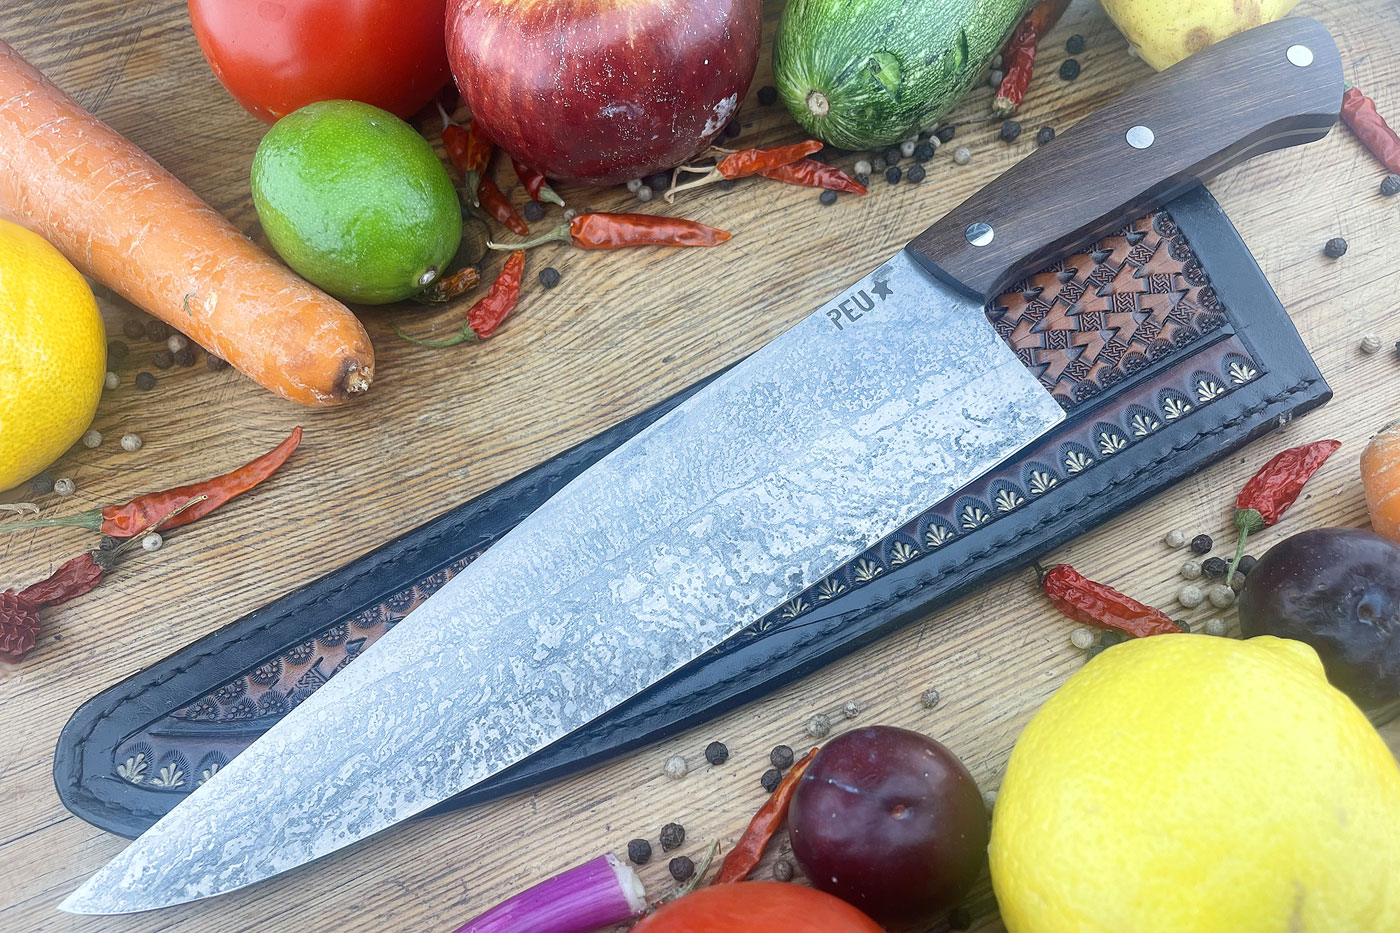 Chef's Knife (Cocinero 230mm) with Guayacan Ebony and O2 Carbon Steel